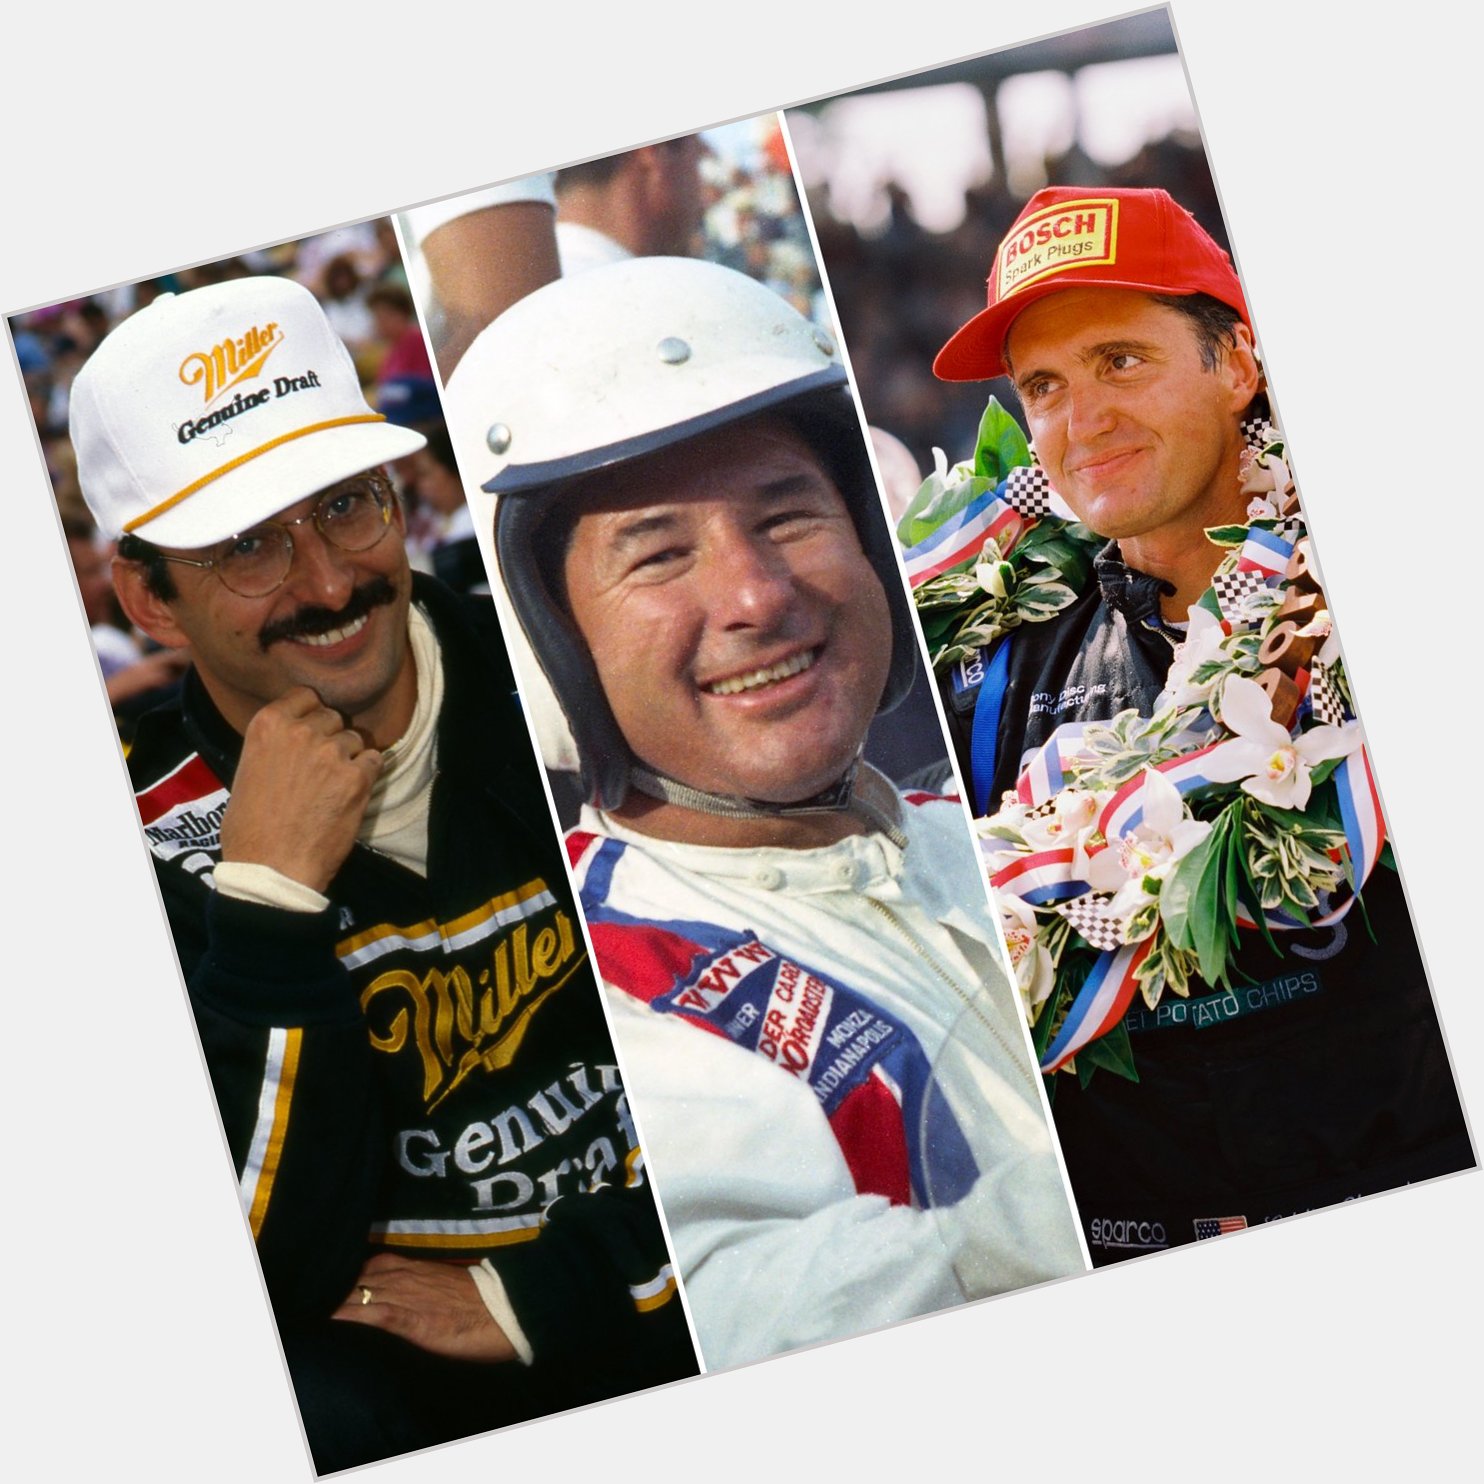 To help us wish a happy birthday to winners Bobby Rahal, Eddie Cheever, and Rodger Ward! 